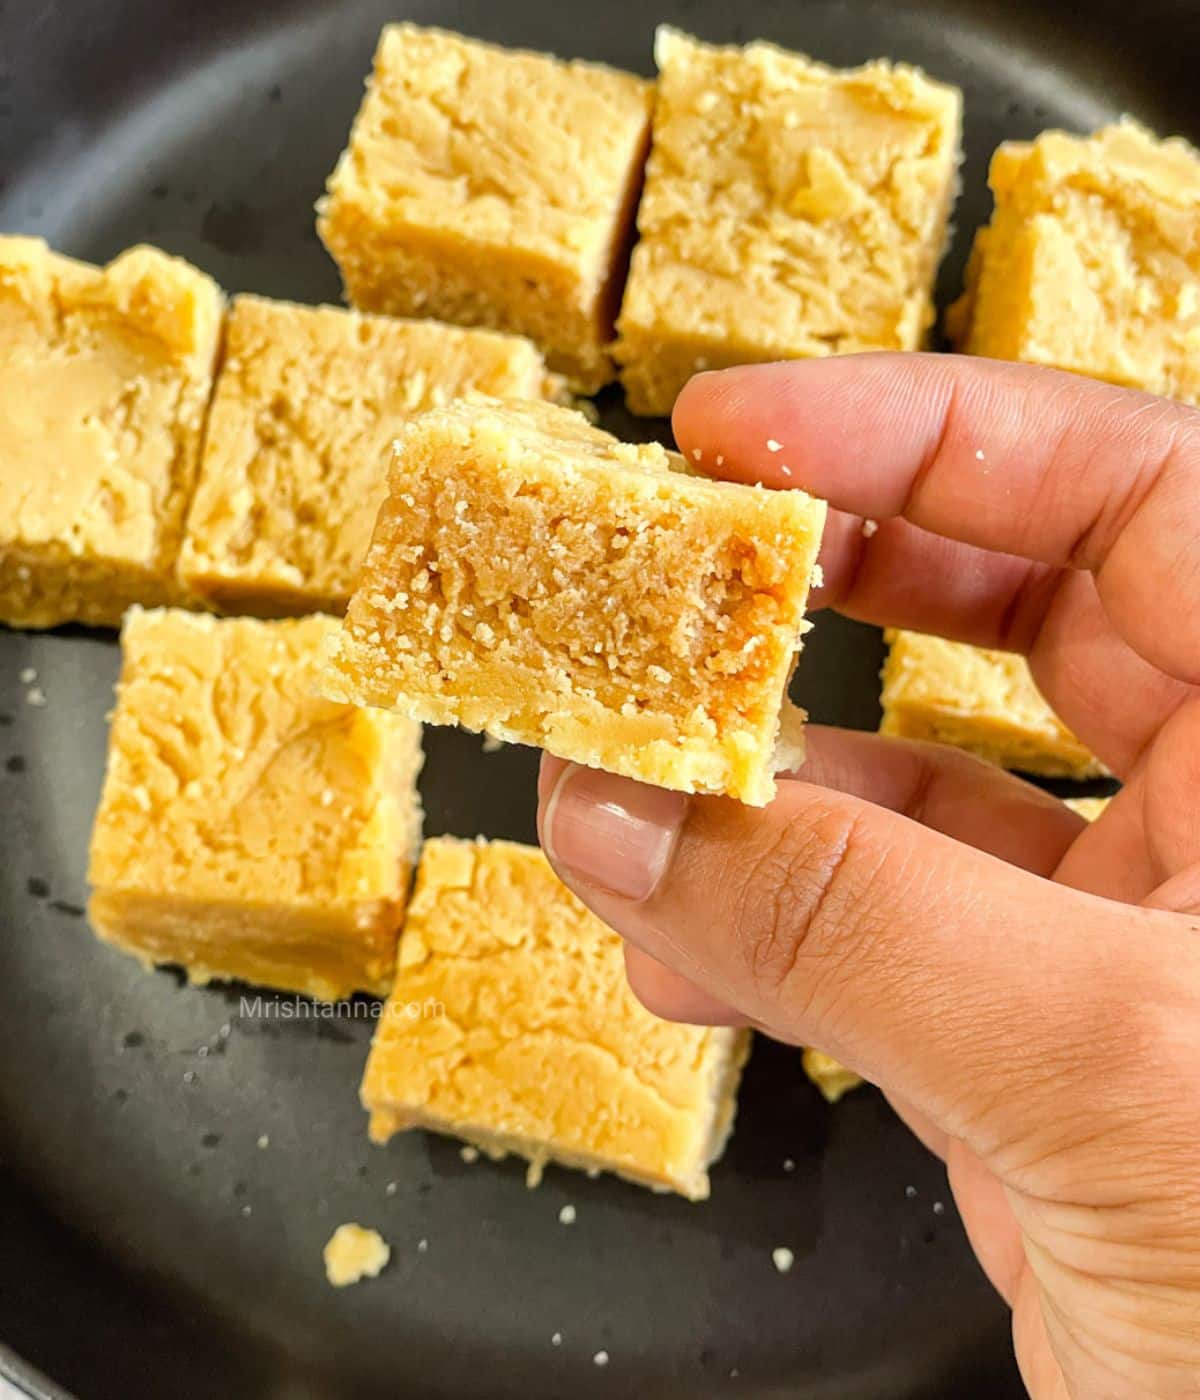 A hand is holding up a piece of vegan mysore pak.